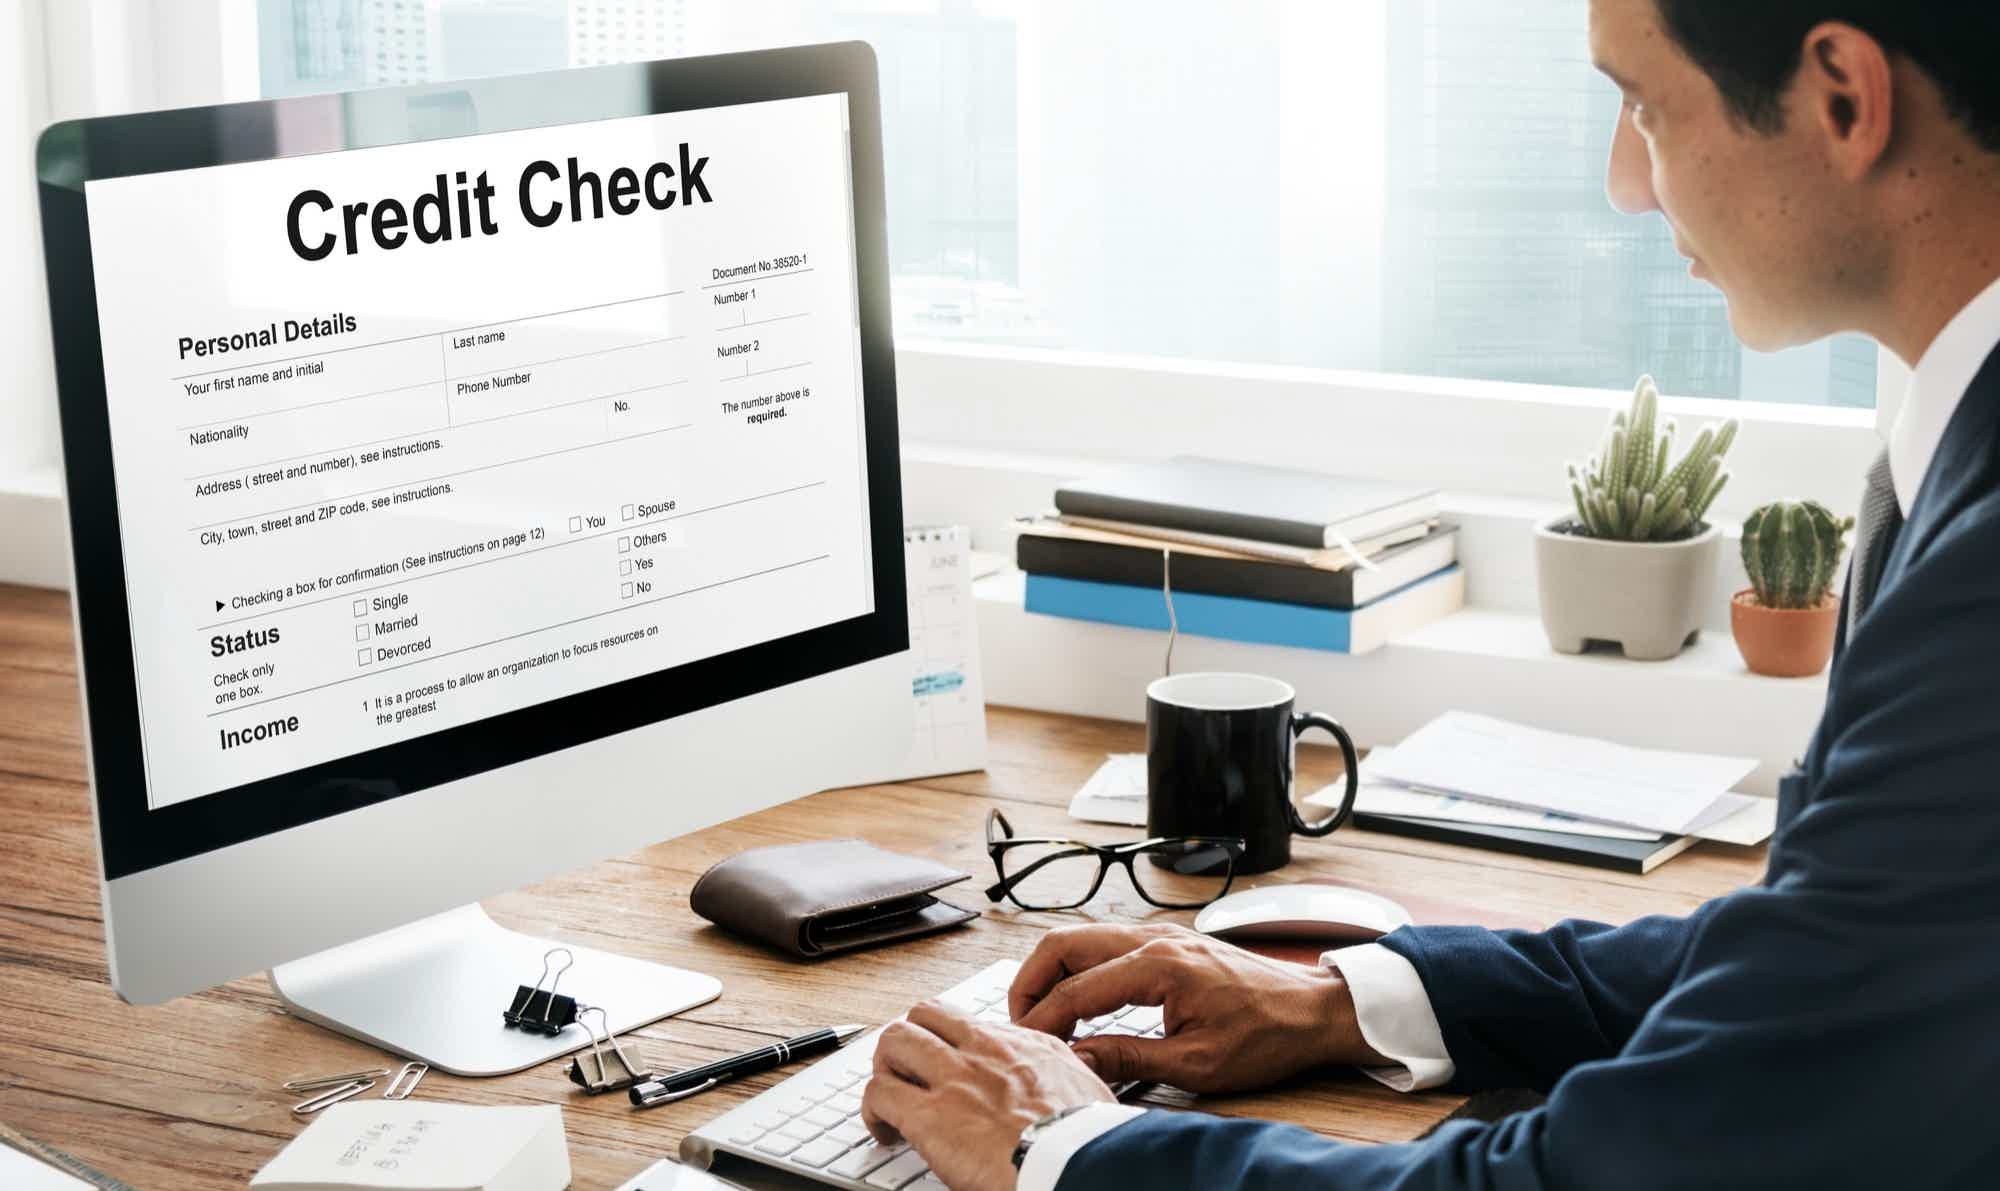 Your credit score has a big role in your credit card application. Source: Freepik.